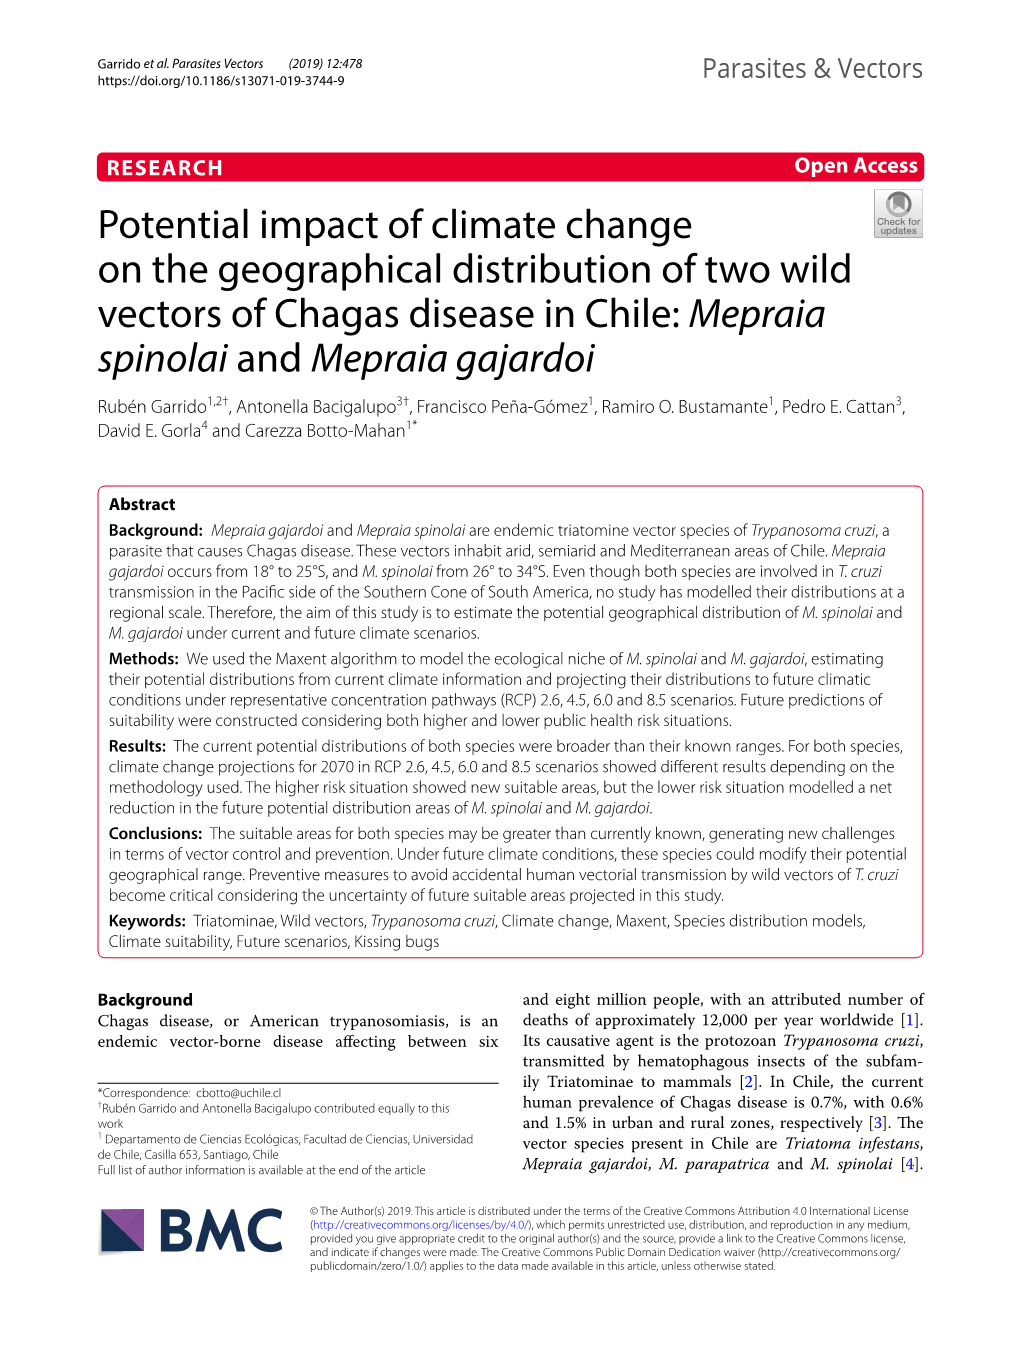 Potential Impact of Climate Change on The